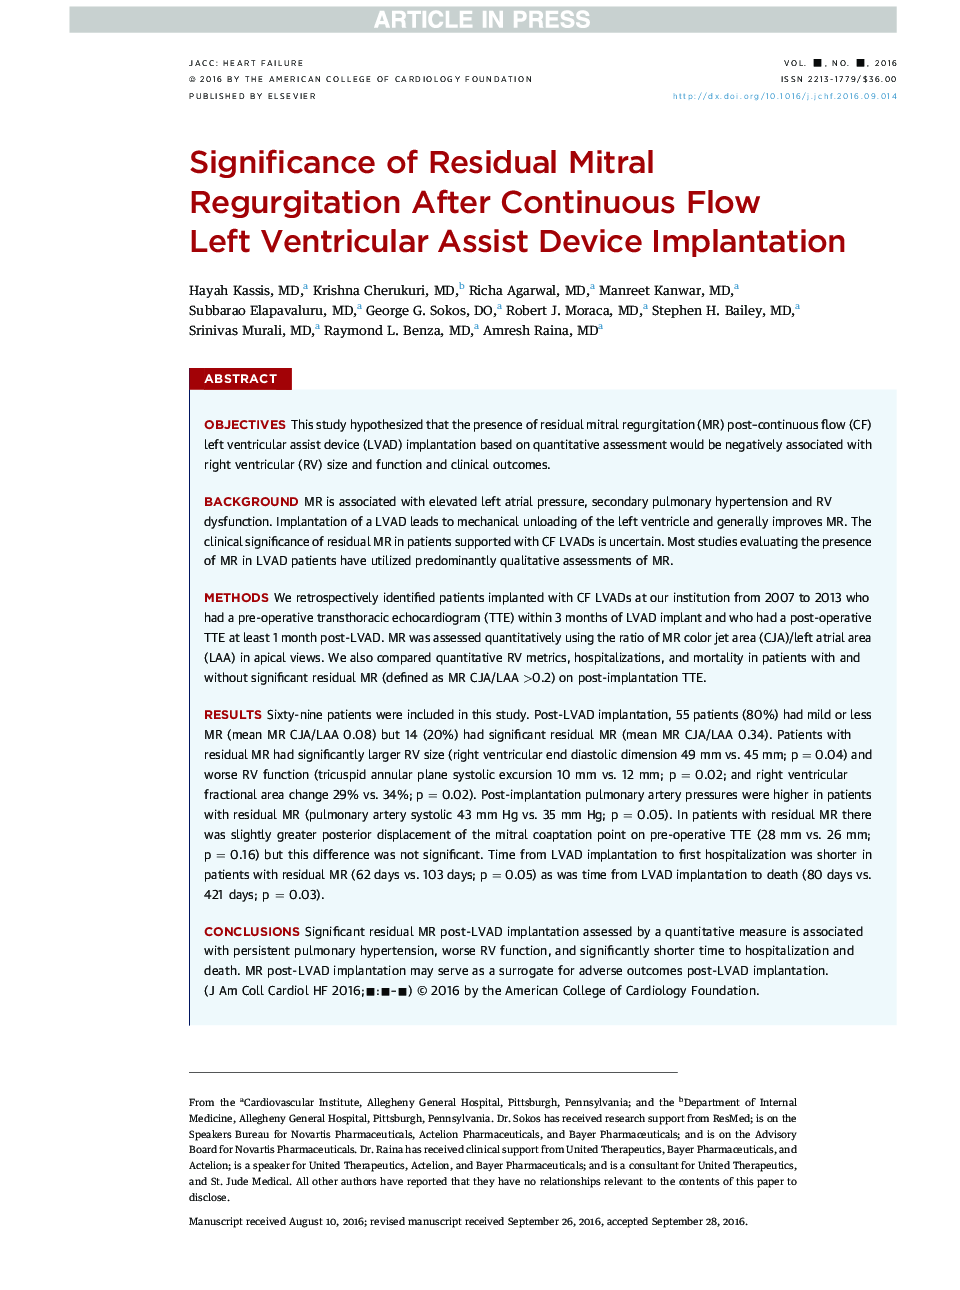 Significance of Residual Mitral Regurgitation After Continuous Flow LeftÂ Ventricular Assist Device Implantation